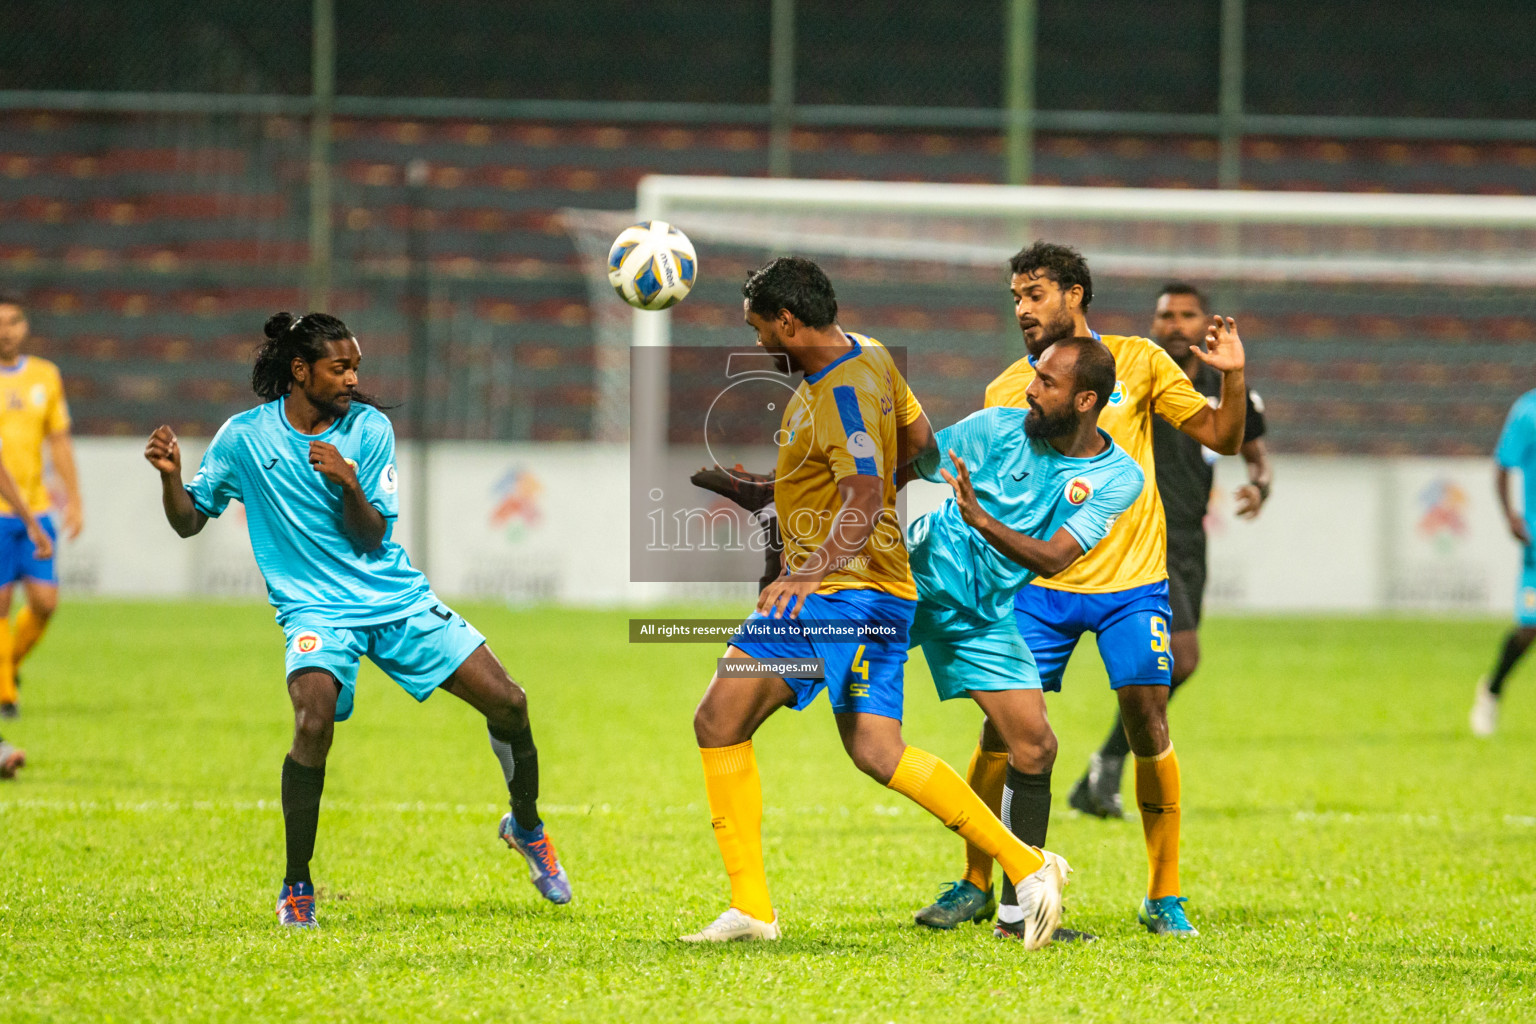 Club Valencia vs United Victory in the President's Cup 2021/2022 held in Male', Maldives on 19 December 2021